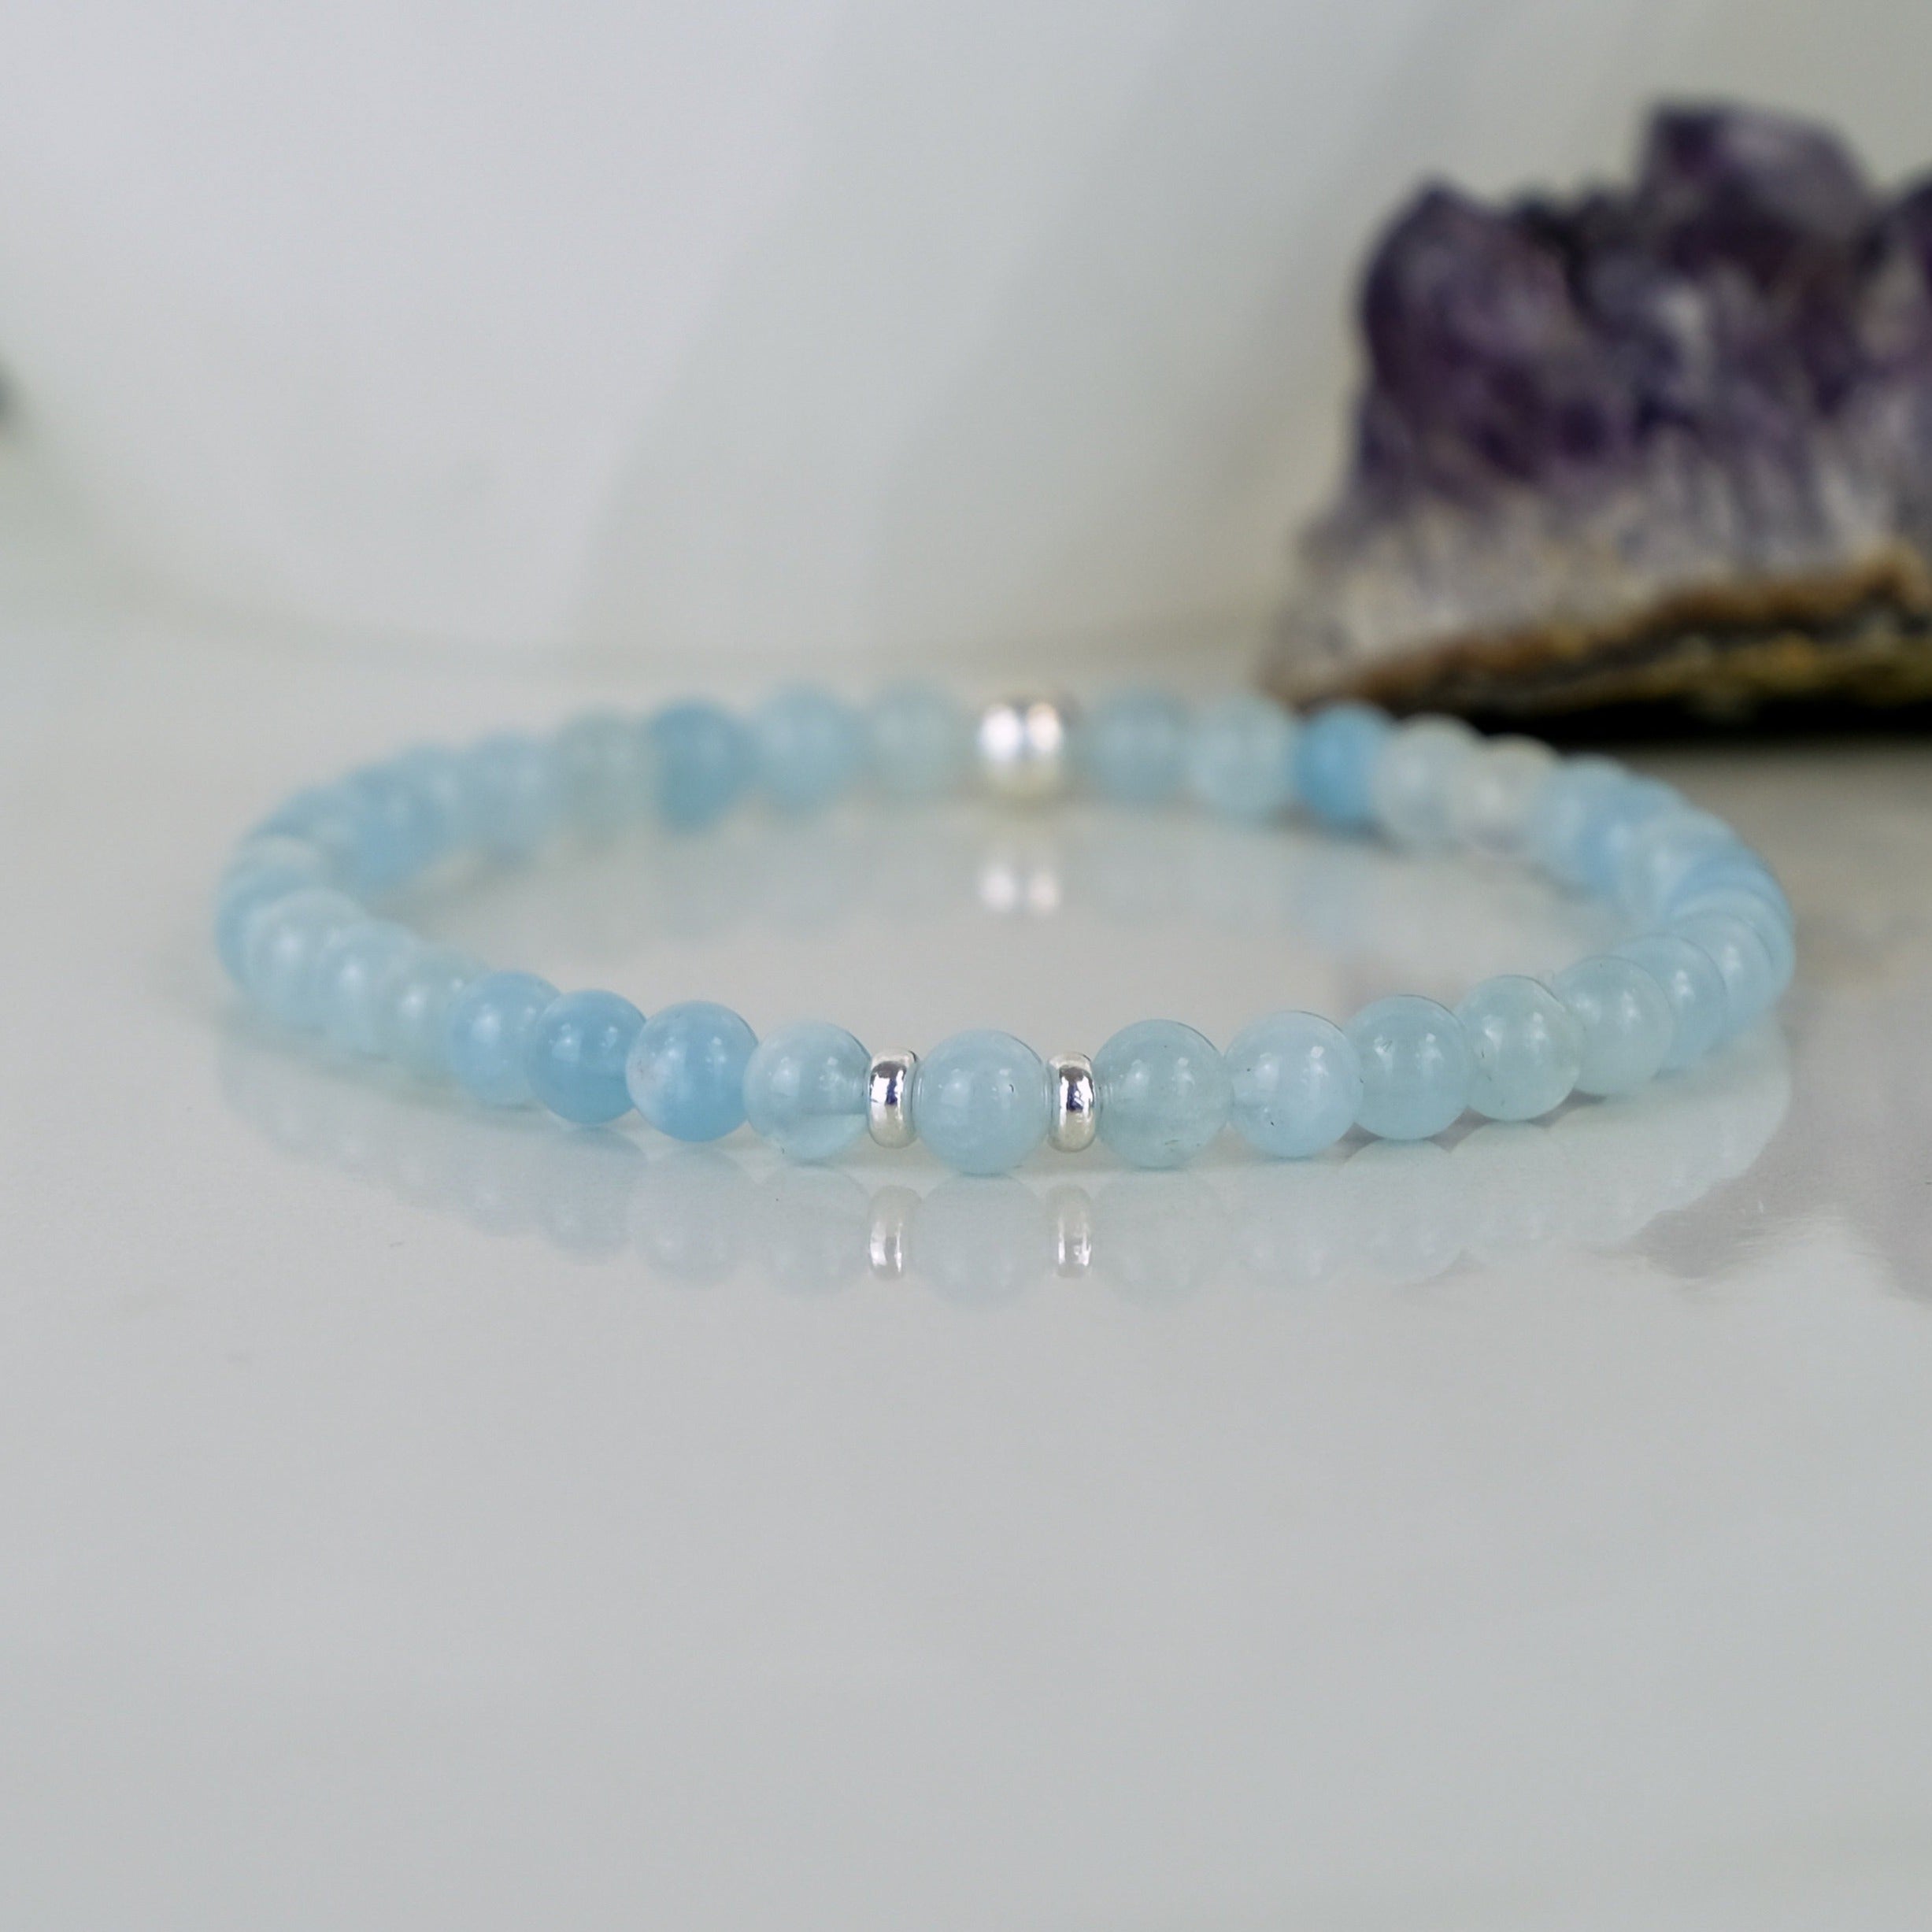 Aquamarine gemstone bracelet in 4mm beads with silver accessories